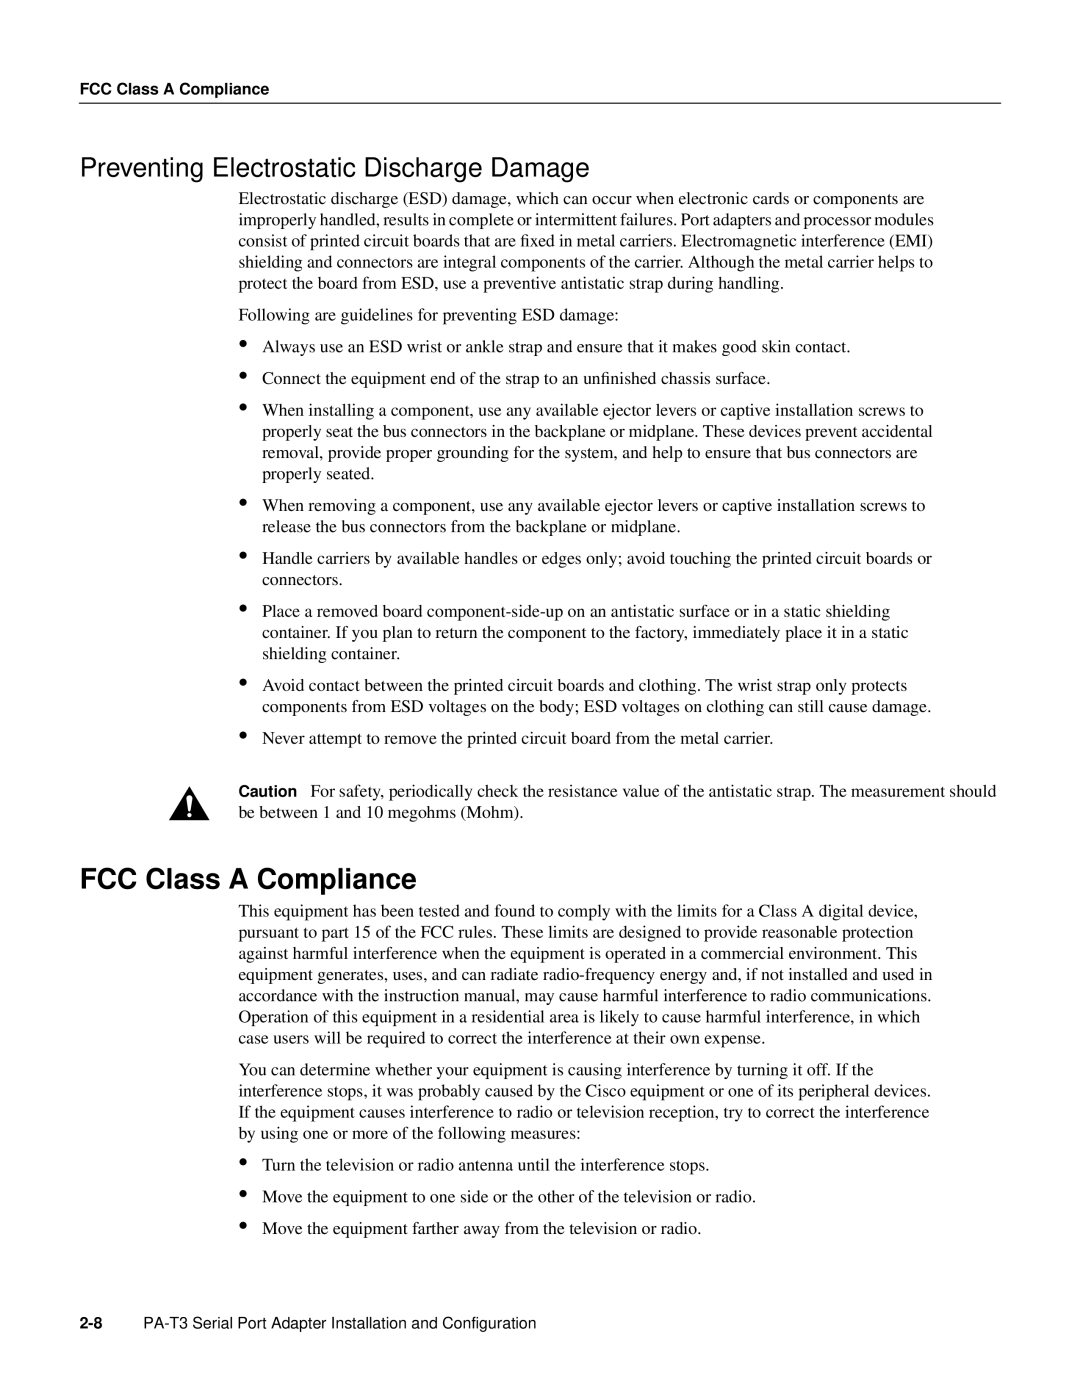 Cisco Systems PA-T3 manual FCC Class A Compliance, Preventing Electrostatic Discharge Damage 